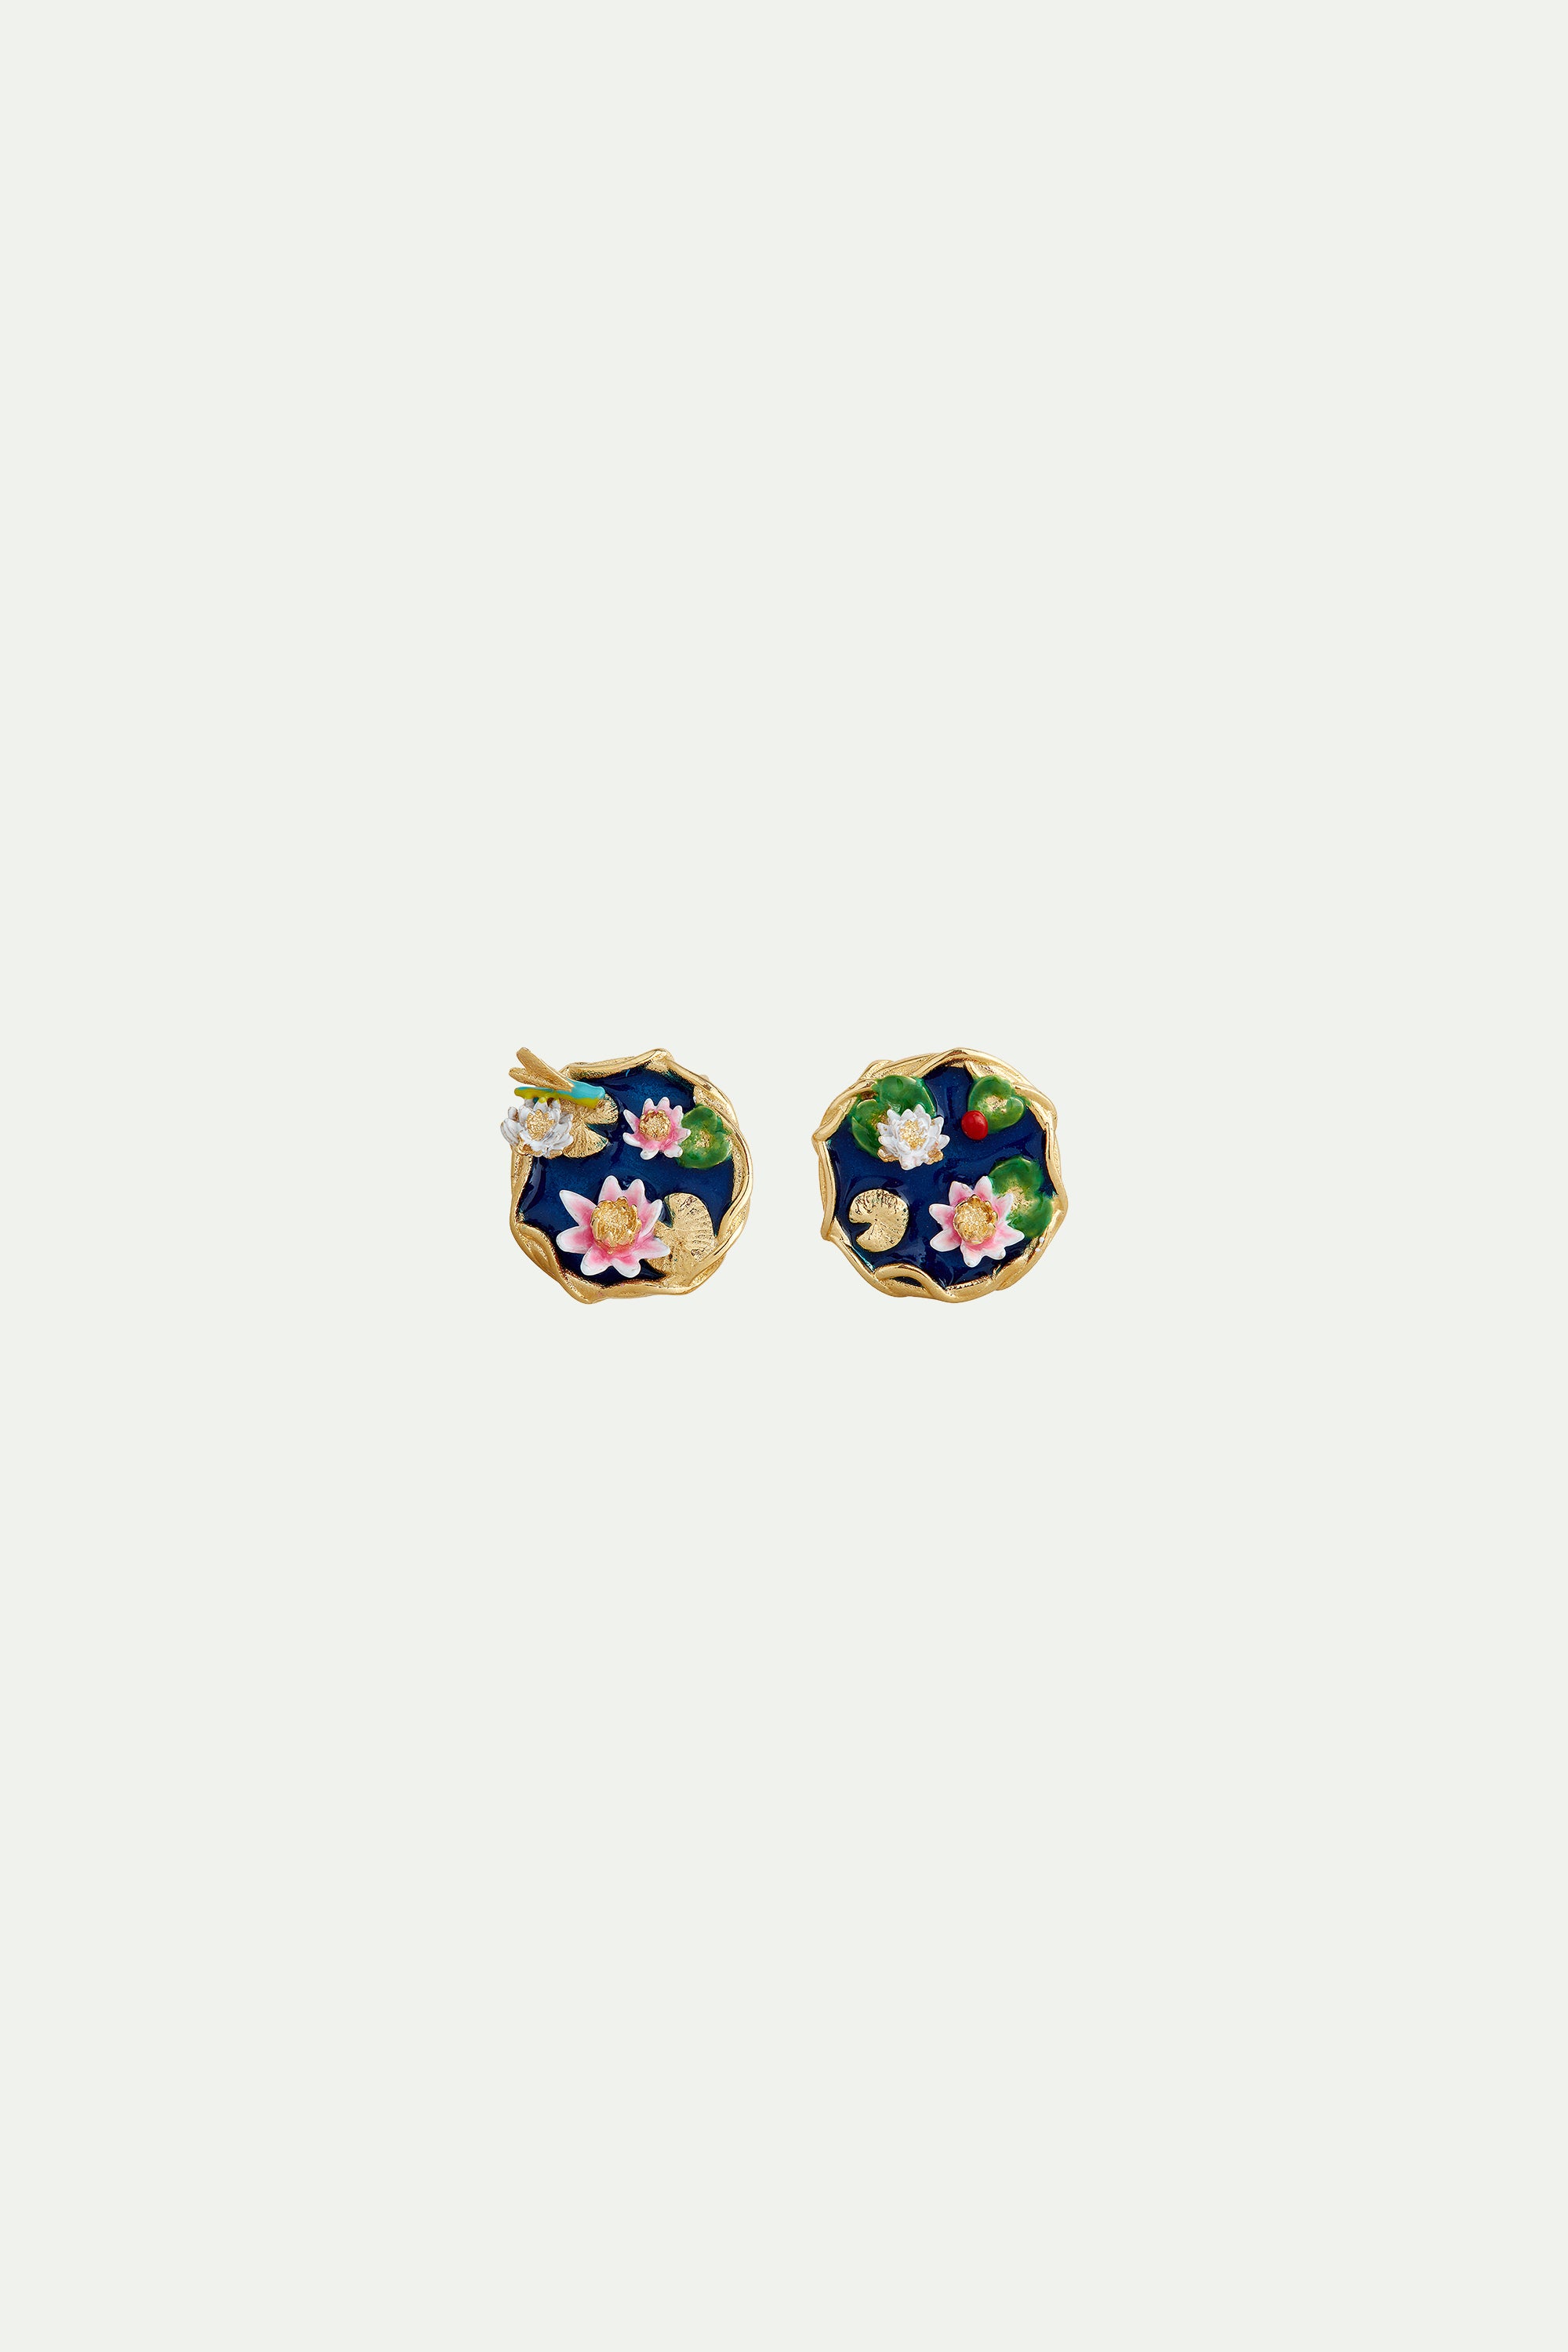 Water lily pond post earrings